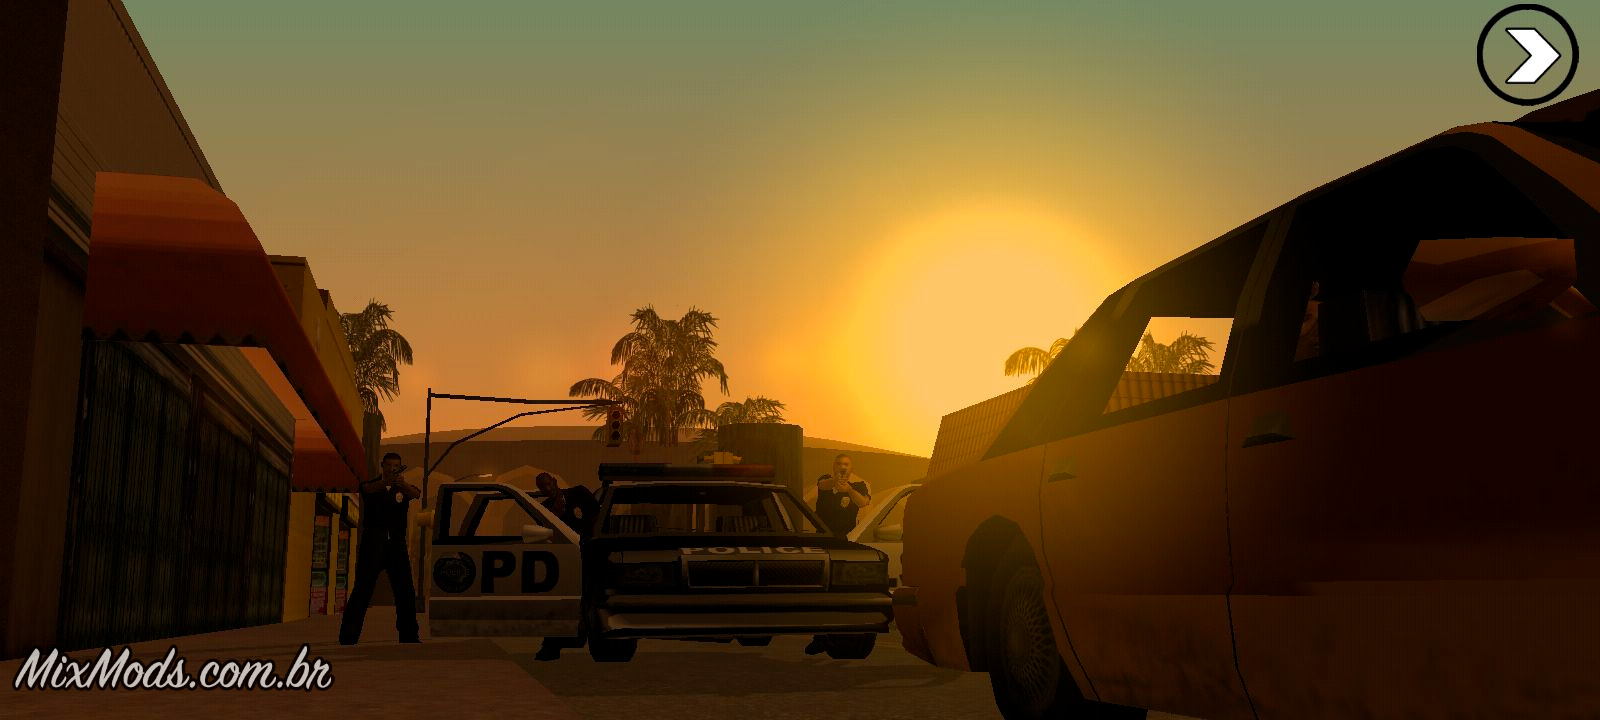 GTA San Andreas for Android - MixMods